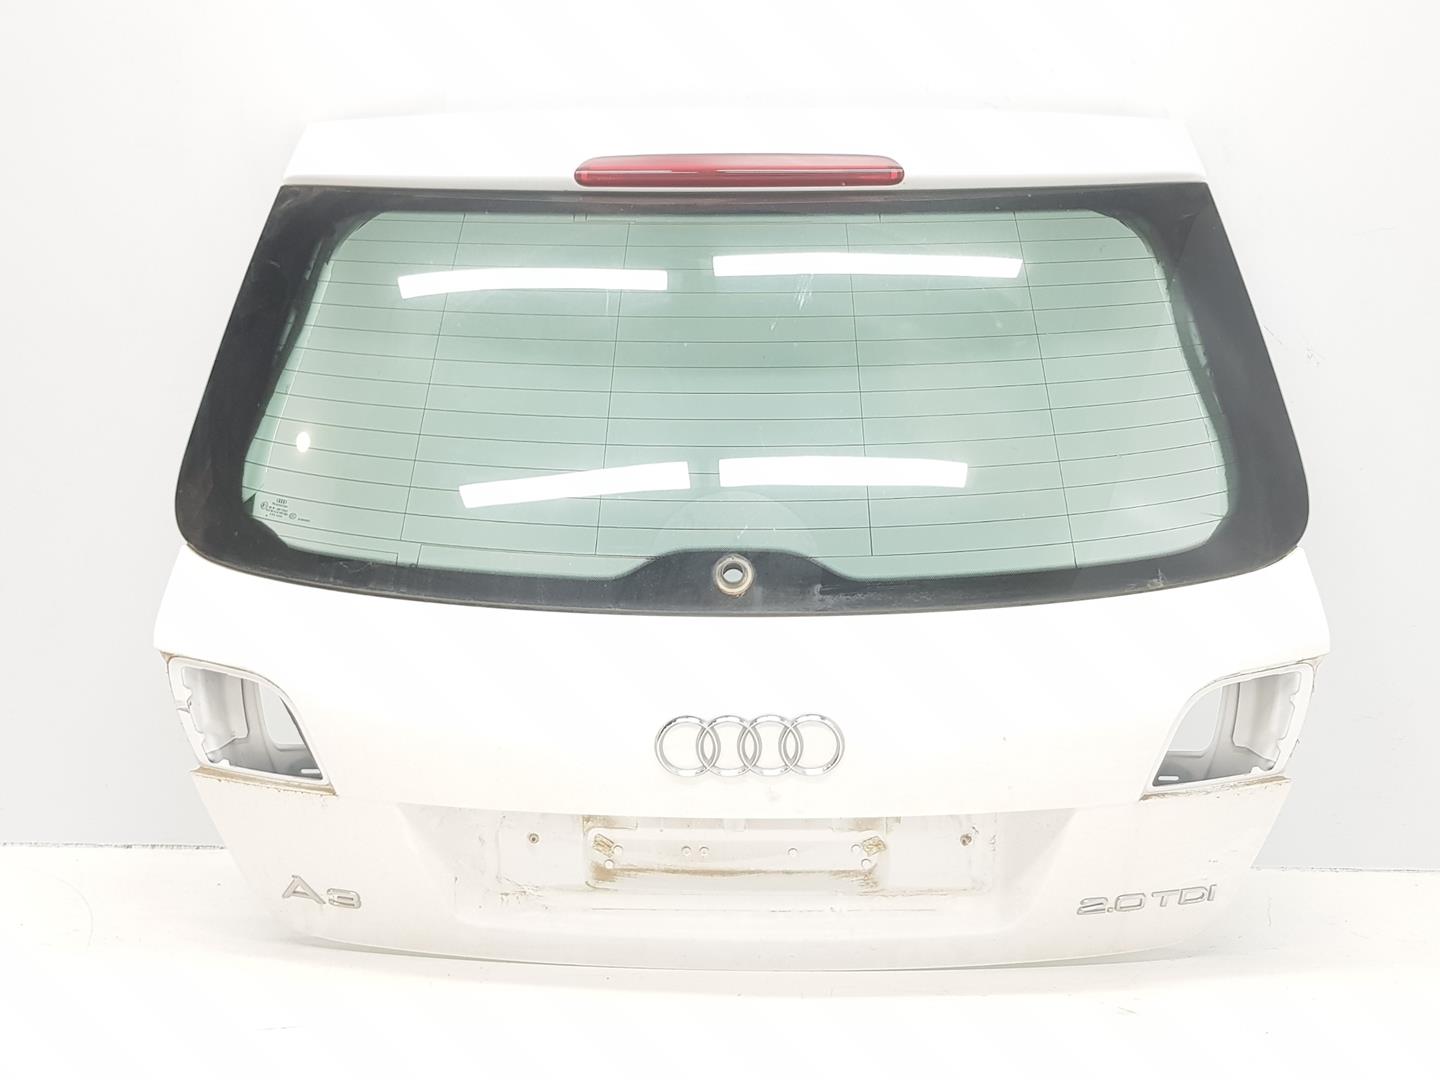 AUDI A2 8Z (1999-2005) Bootlid Rear Boot 8P4827023H, 8P4827023H, COLORBLANCOY9C 19925217